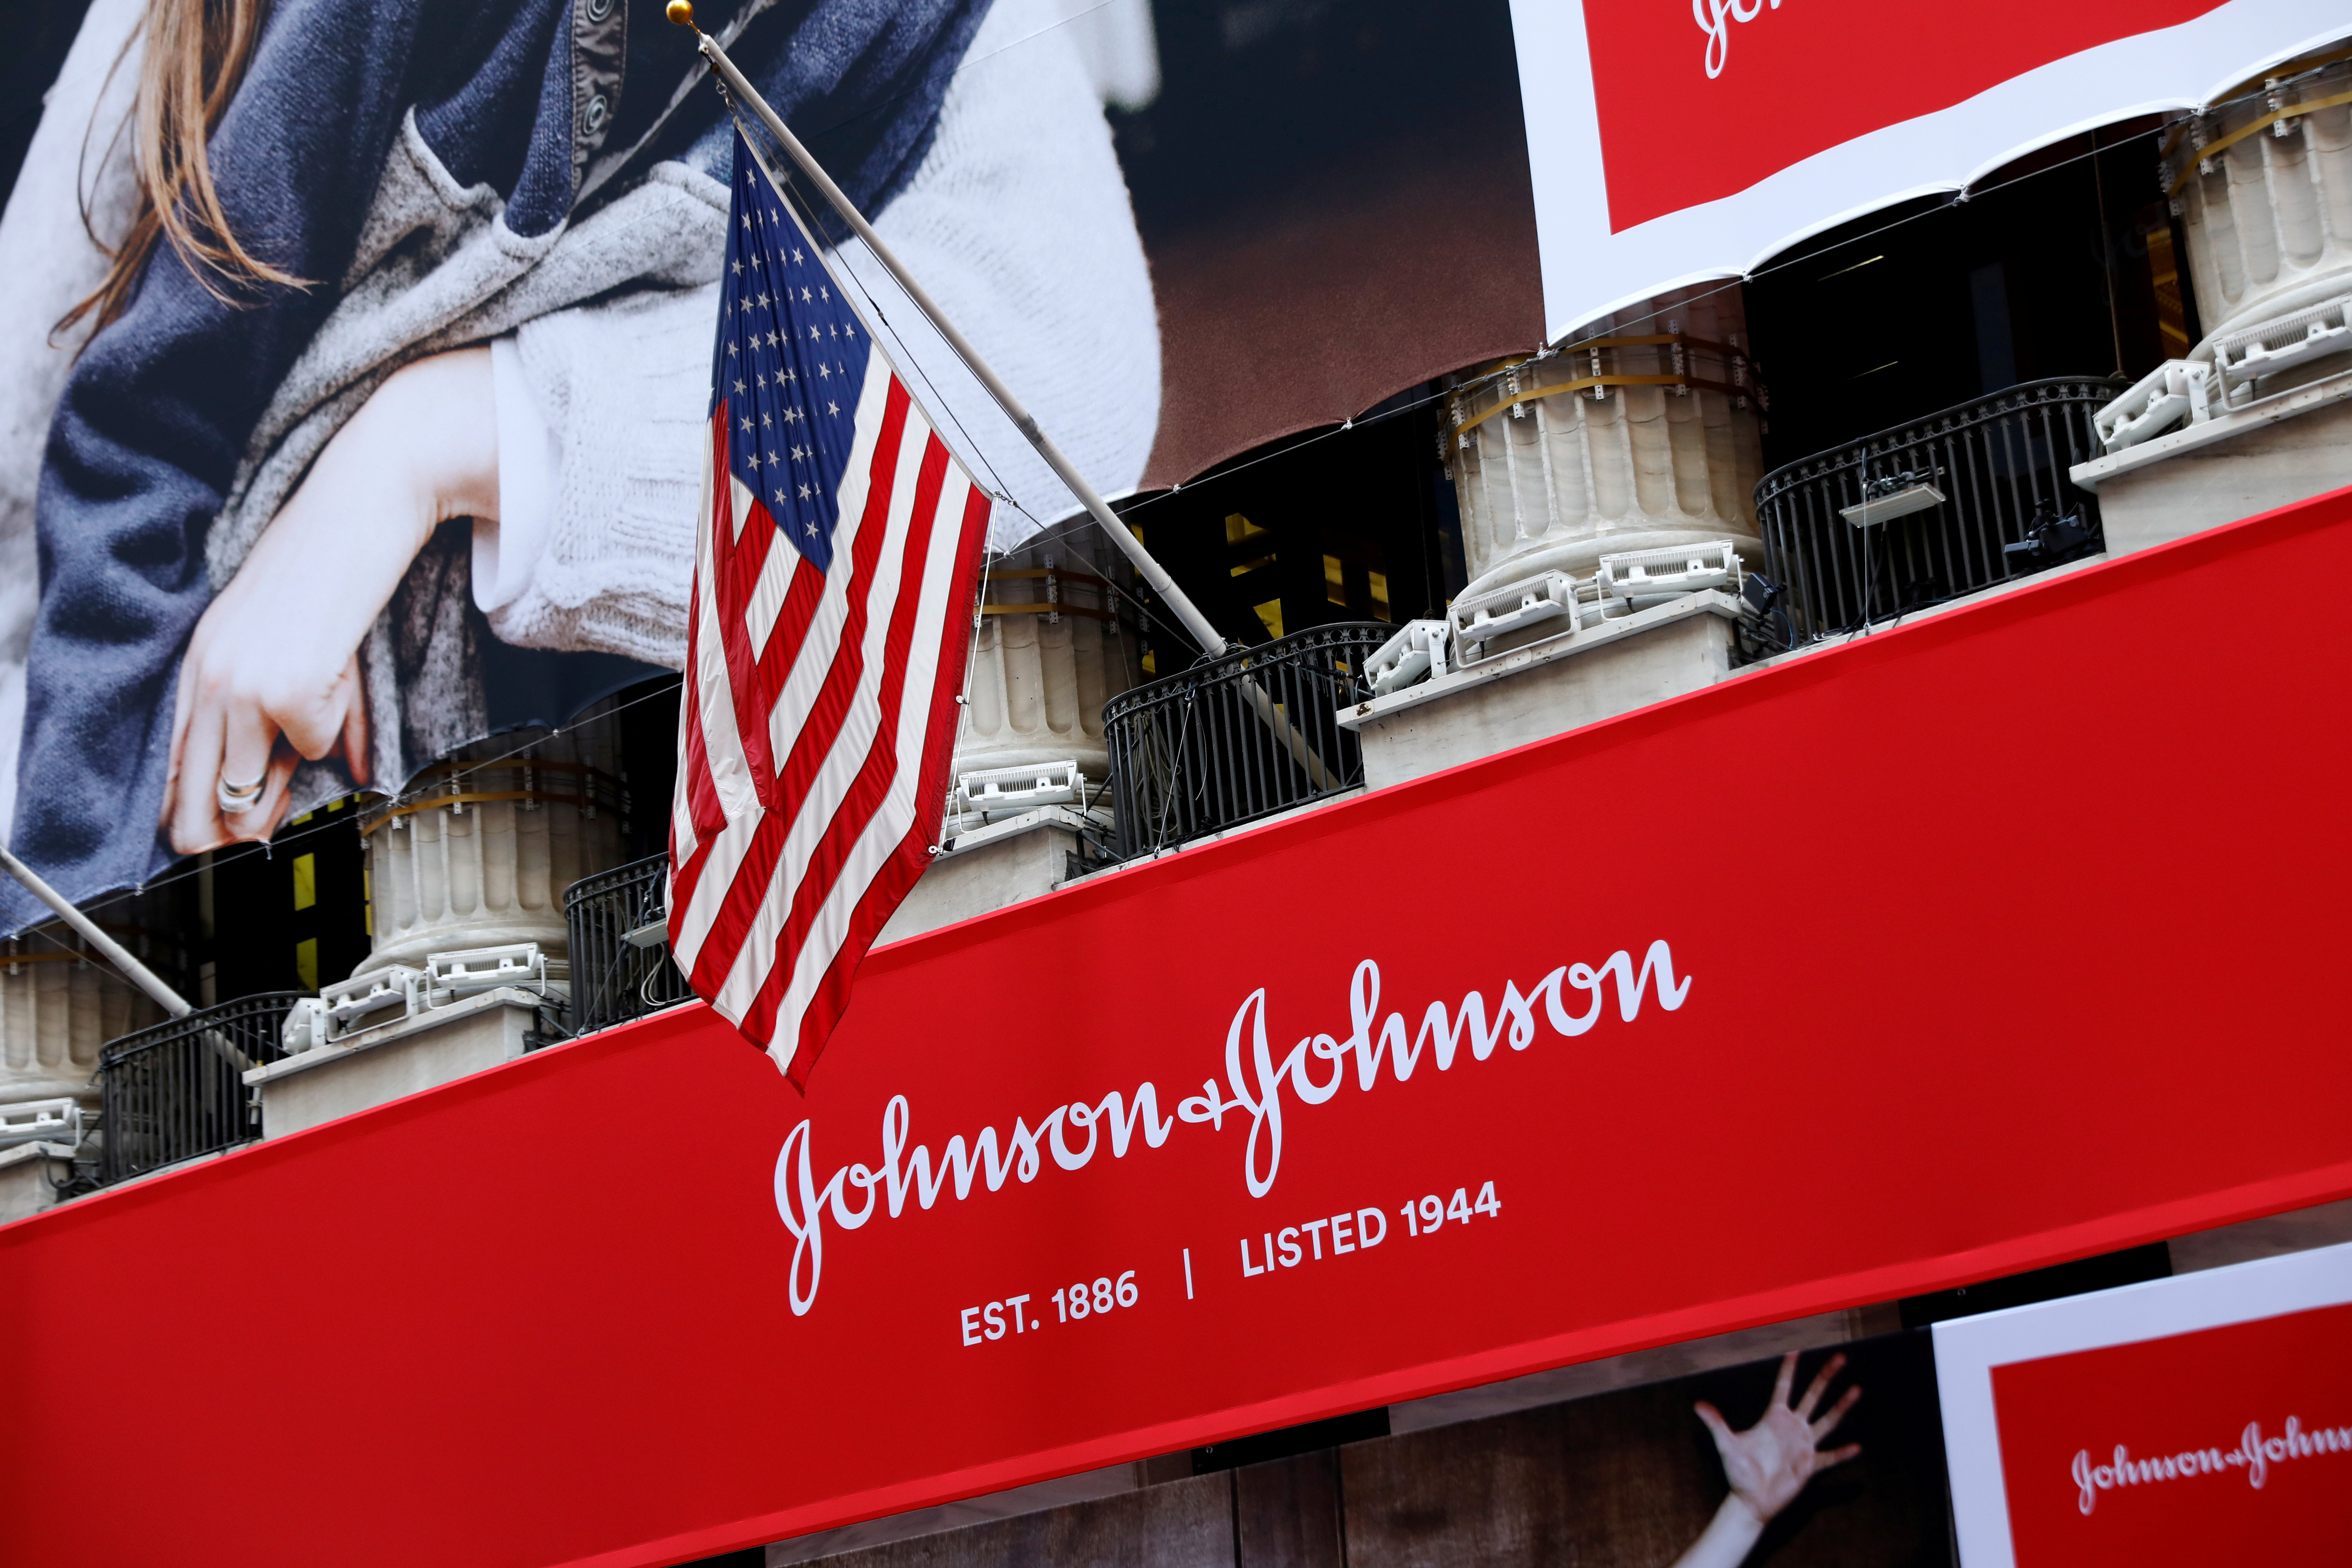 The U.S. flag is seen over the company logo for Johnson & Johnson to celebrate the 75th anniversary of the company's listing at the NYSE in New York